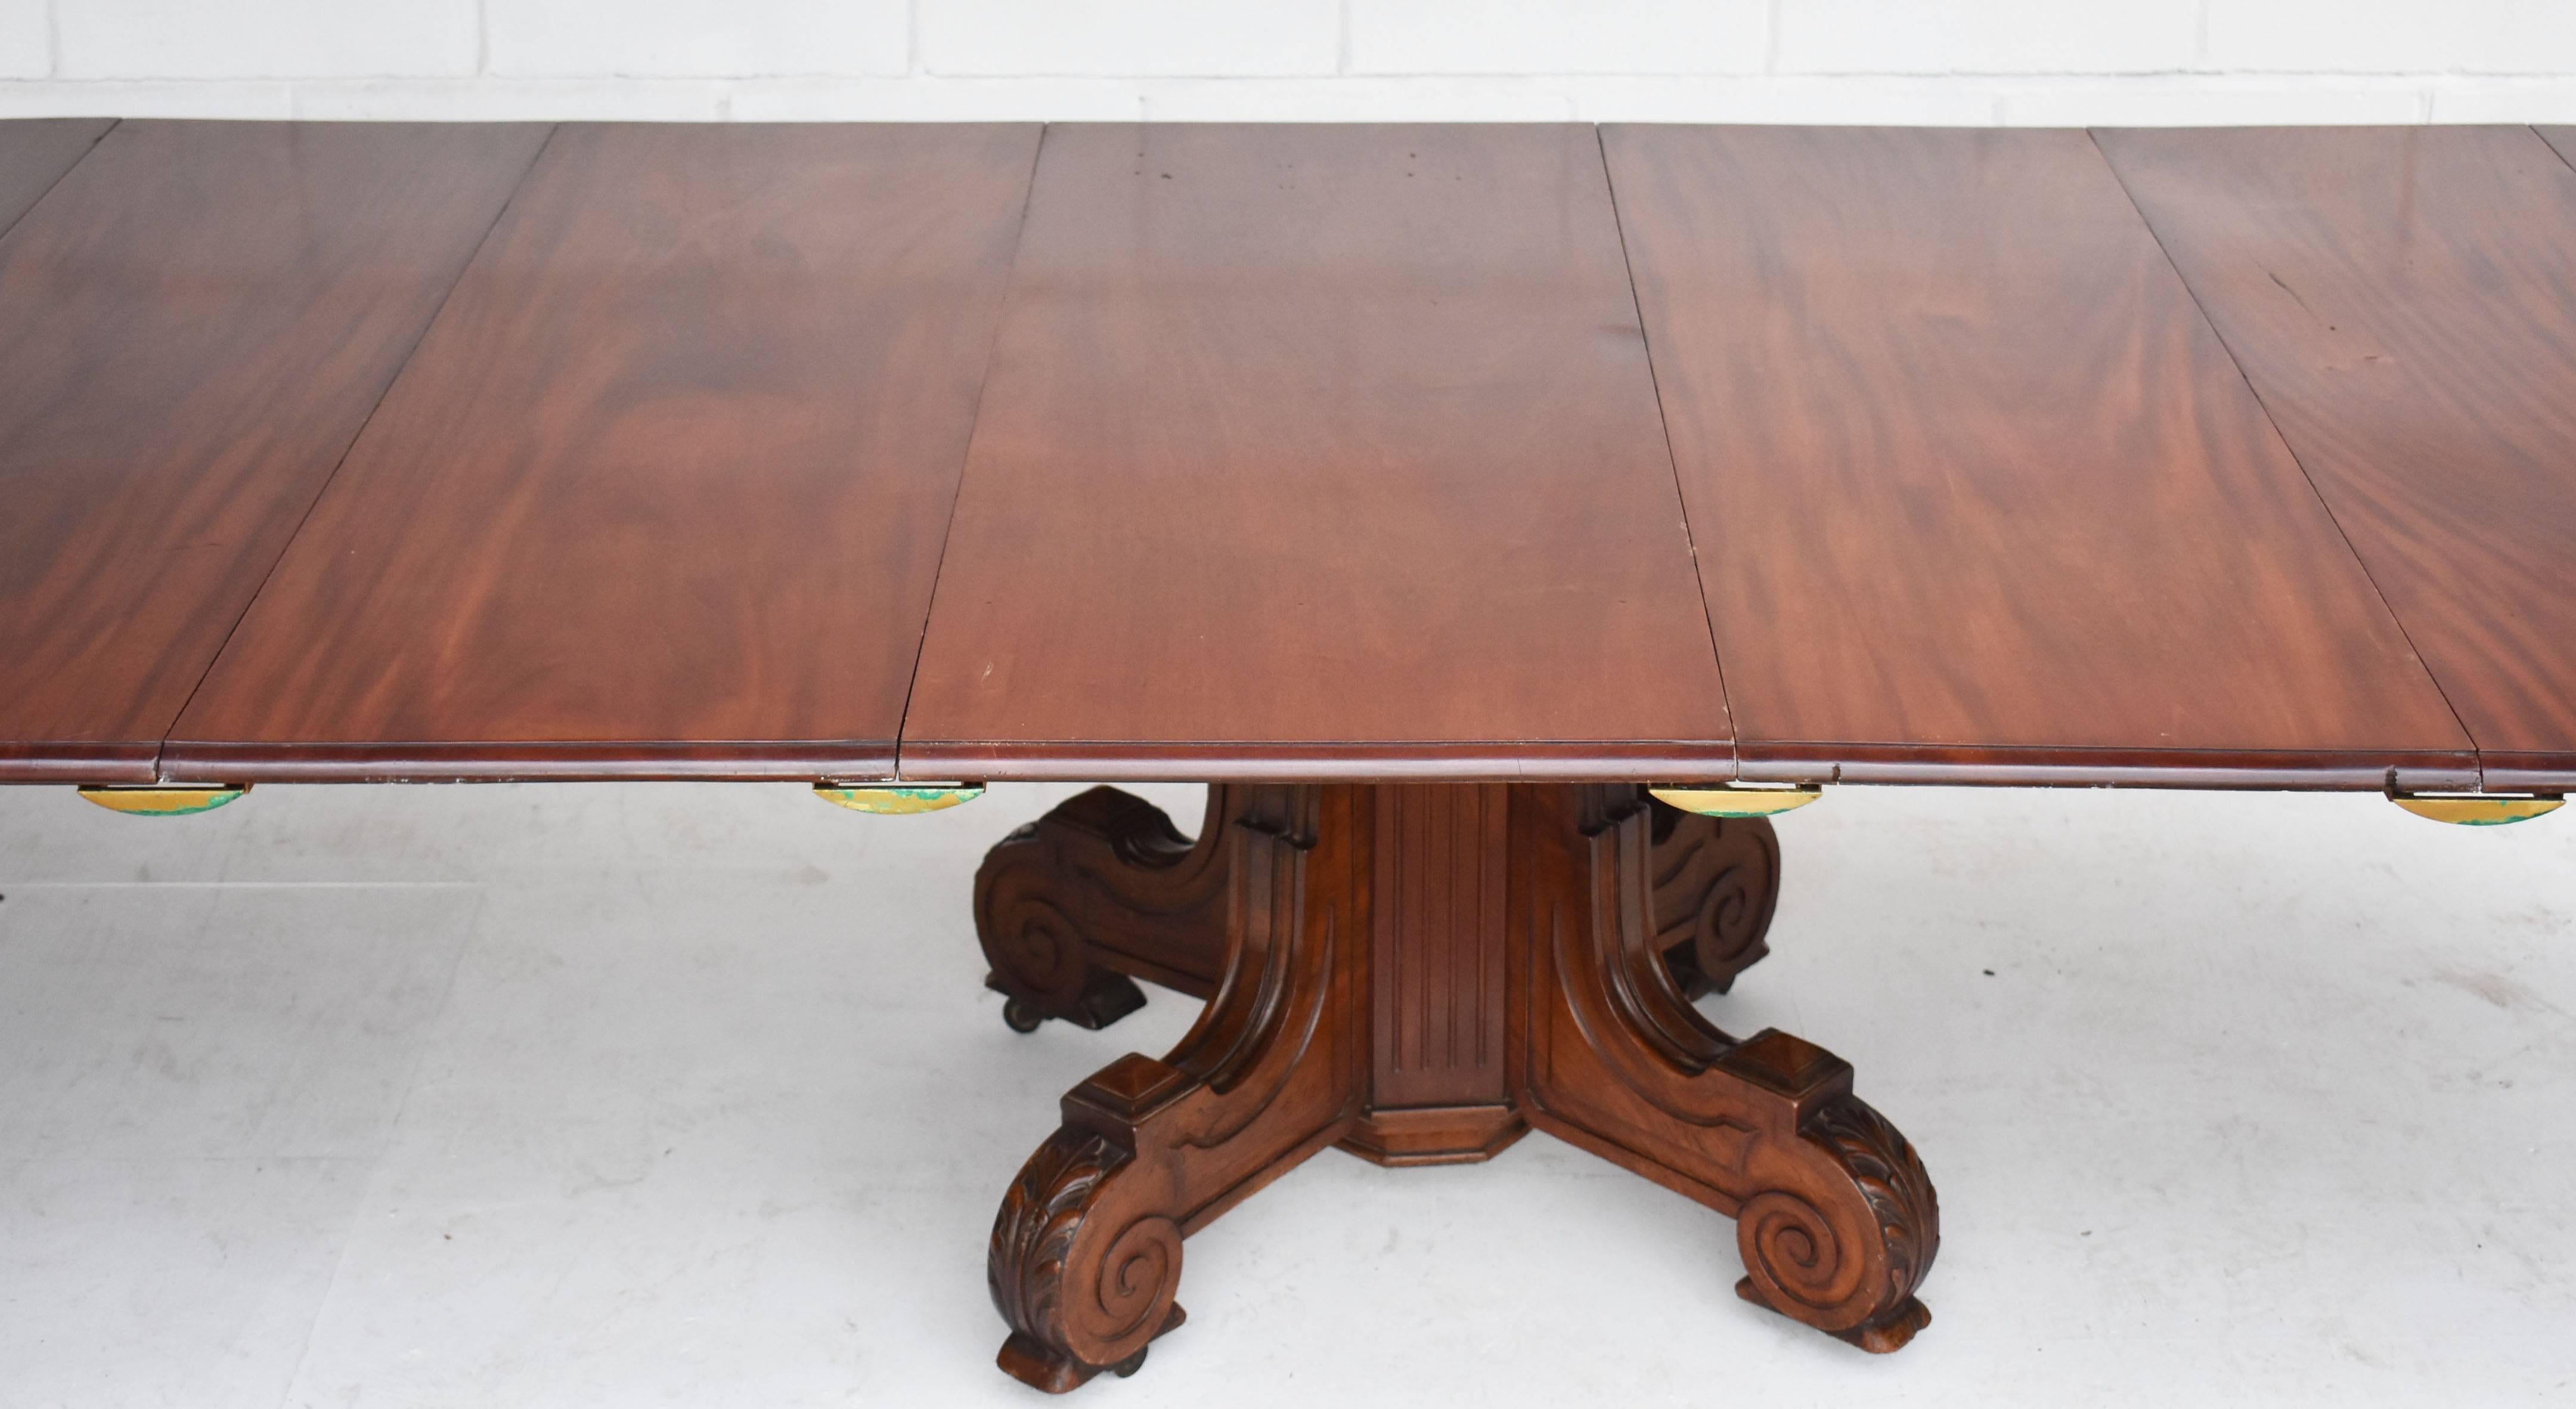 For sale is a fine quality William IV Mahogany extending dining table with five original additional leaves. When closed, the table top is round and is supported by an ornate base to the centre, with four shaped and carved legs stemming from a